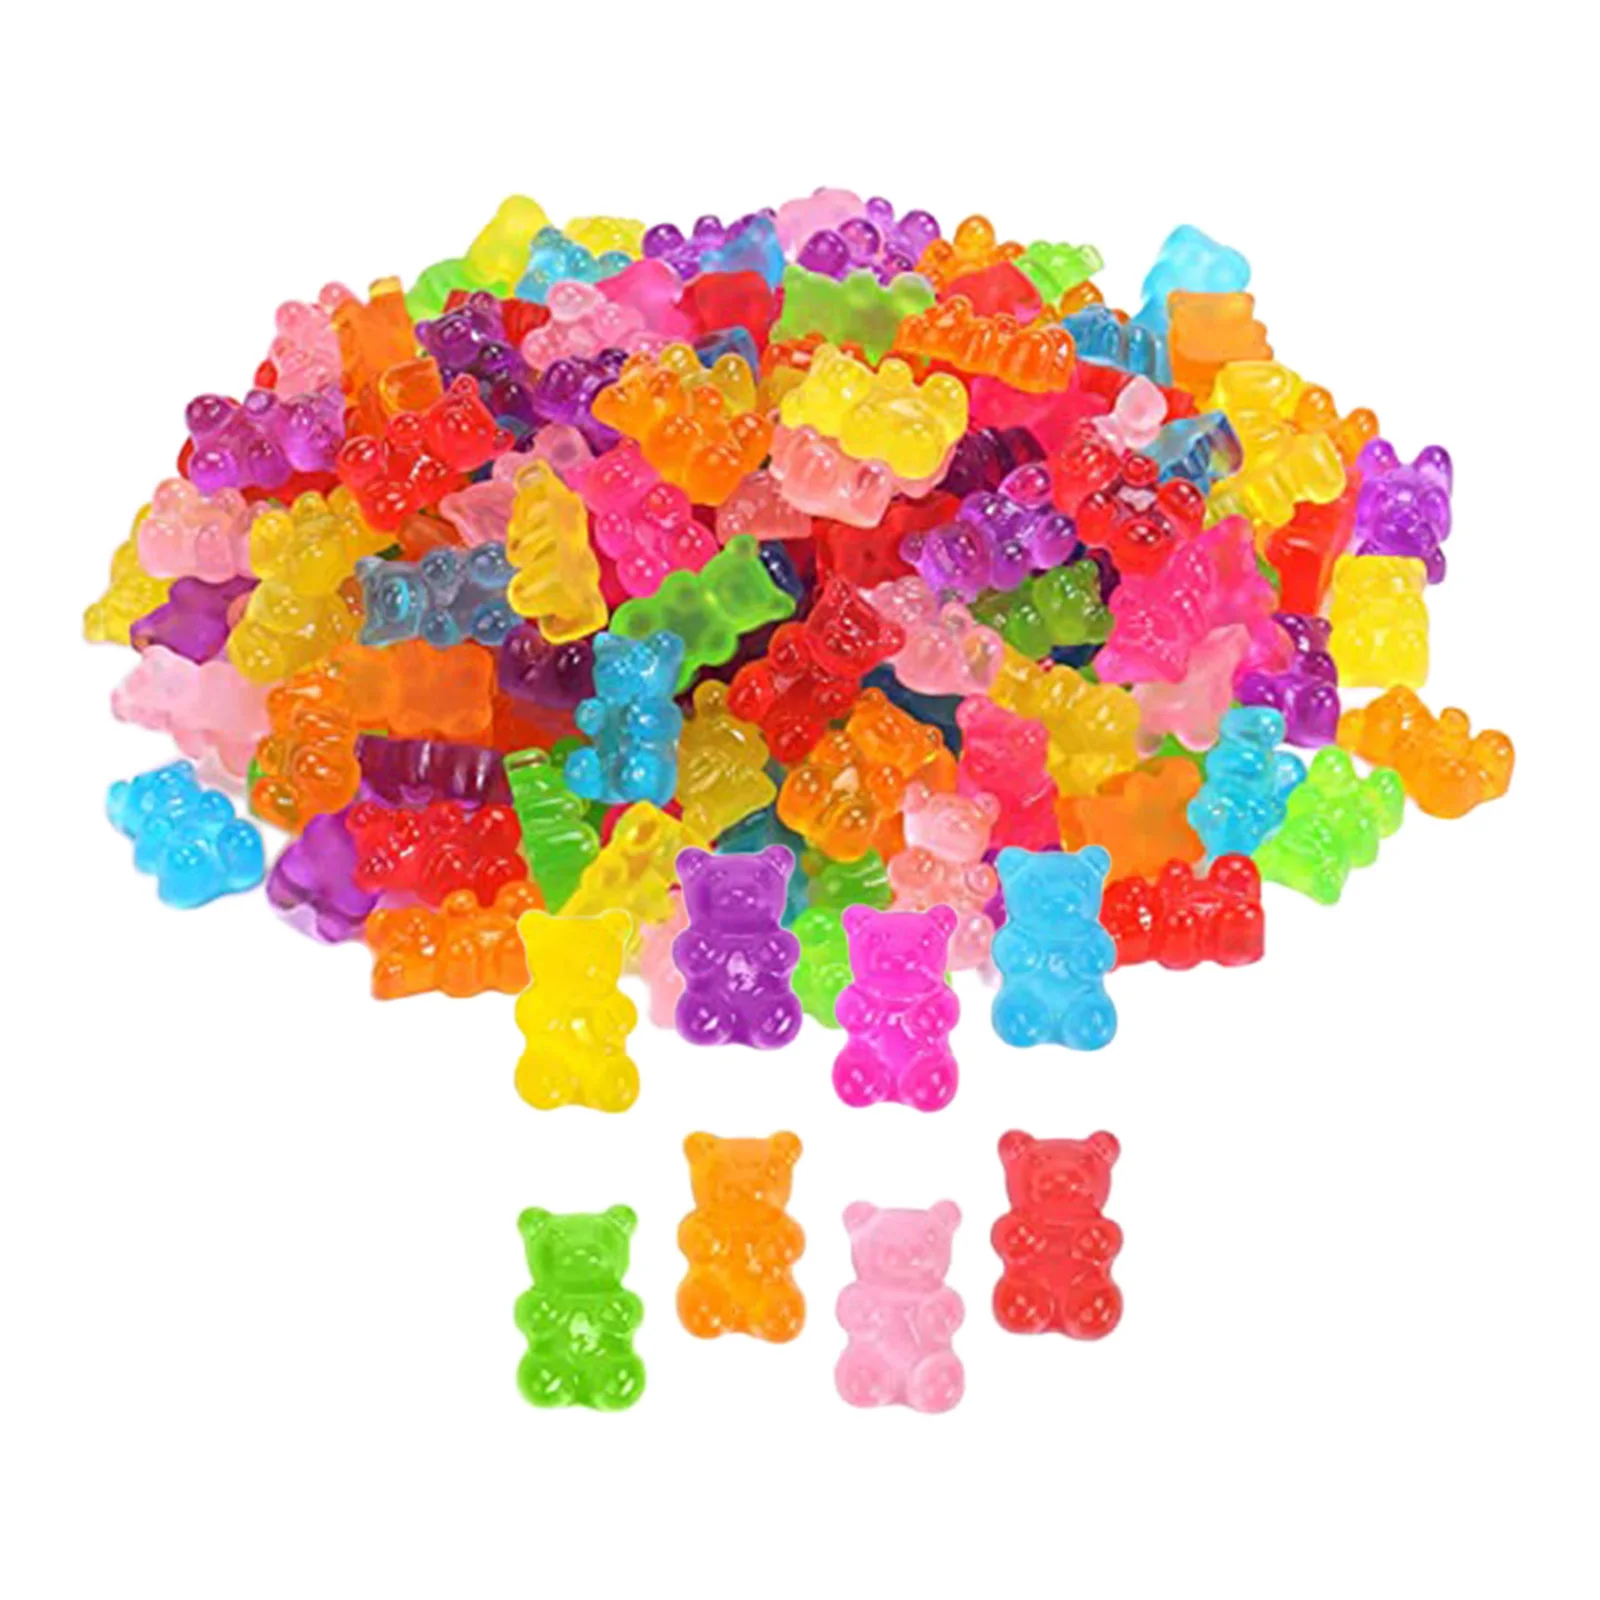 50x Colorful Gummy Resin Bear Nail Charms with Hole for DIY Nails Jewelry Making Necklace Nail Art Decoration for Children Girls